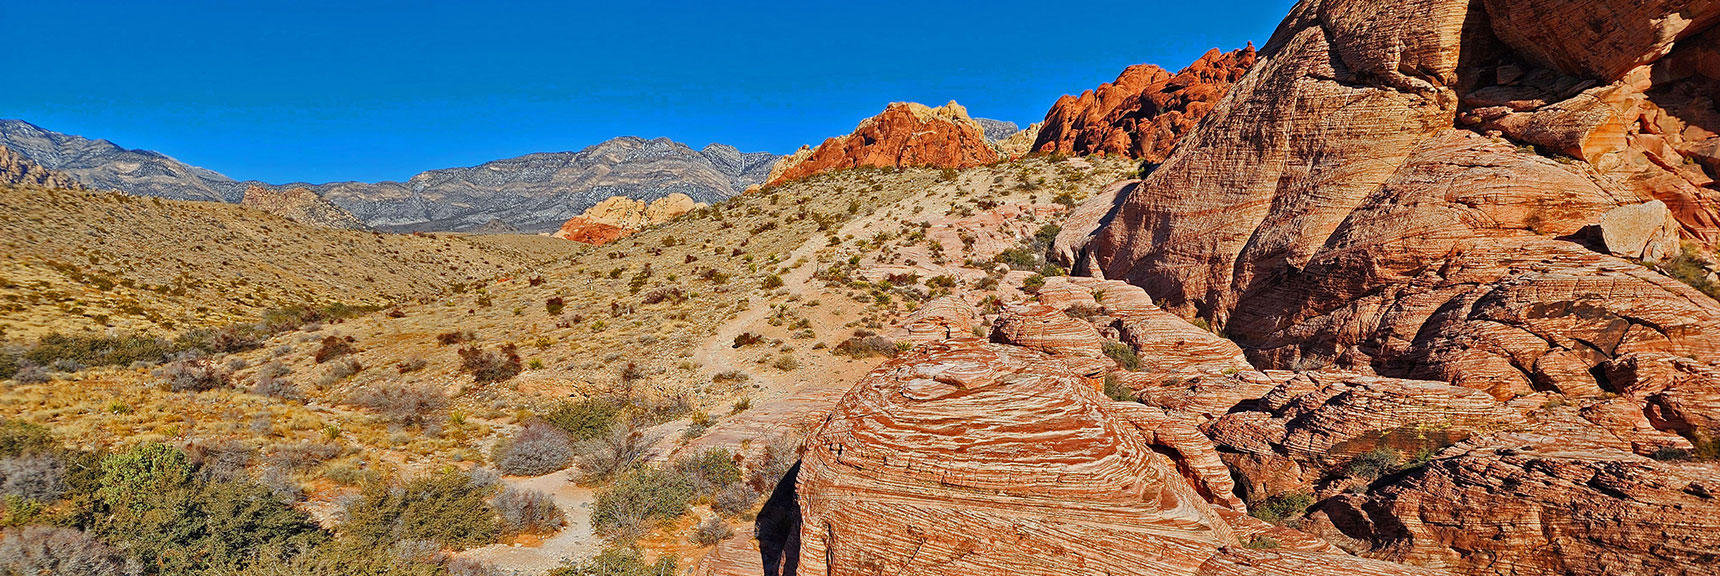 Grand Circle Loop Descends into Wash, Crosses, Ascends to Spectacular Viewpoint | 3 Basin Circuit | Calico Basin, Brownstone Basin, Red Rock Canyon, Nevada